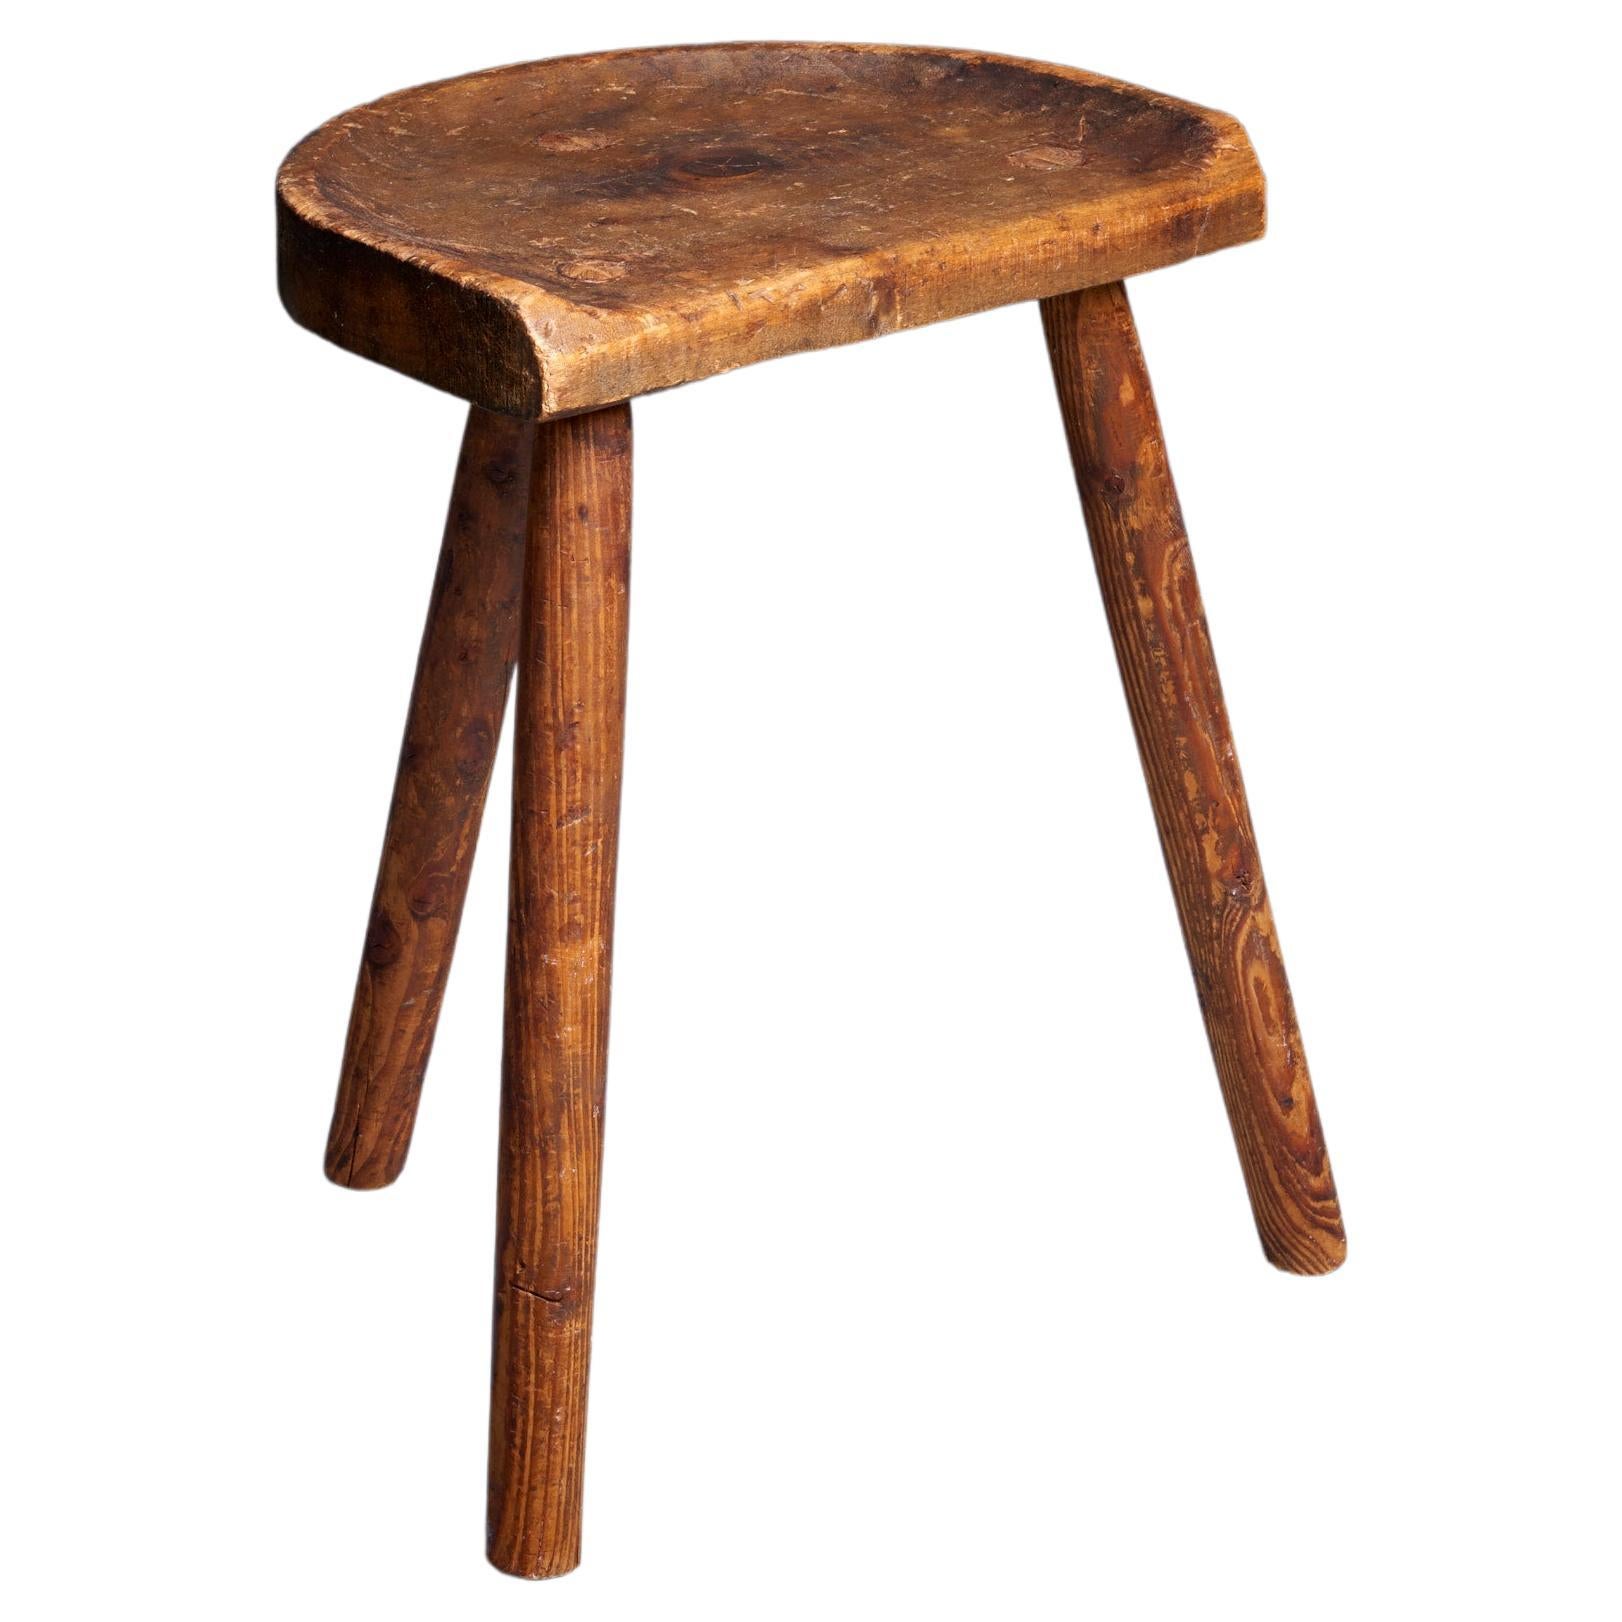 Antique Black Forest Farmers Tripod Stool 19th Century in Pine Wood, Germany